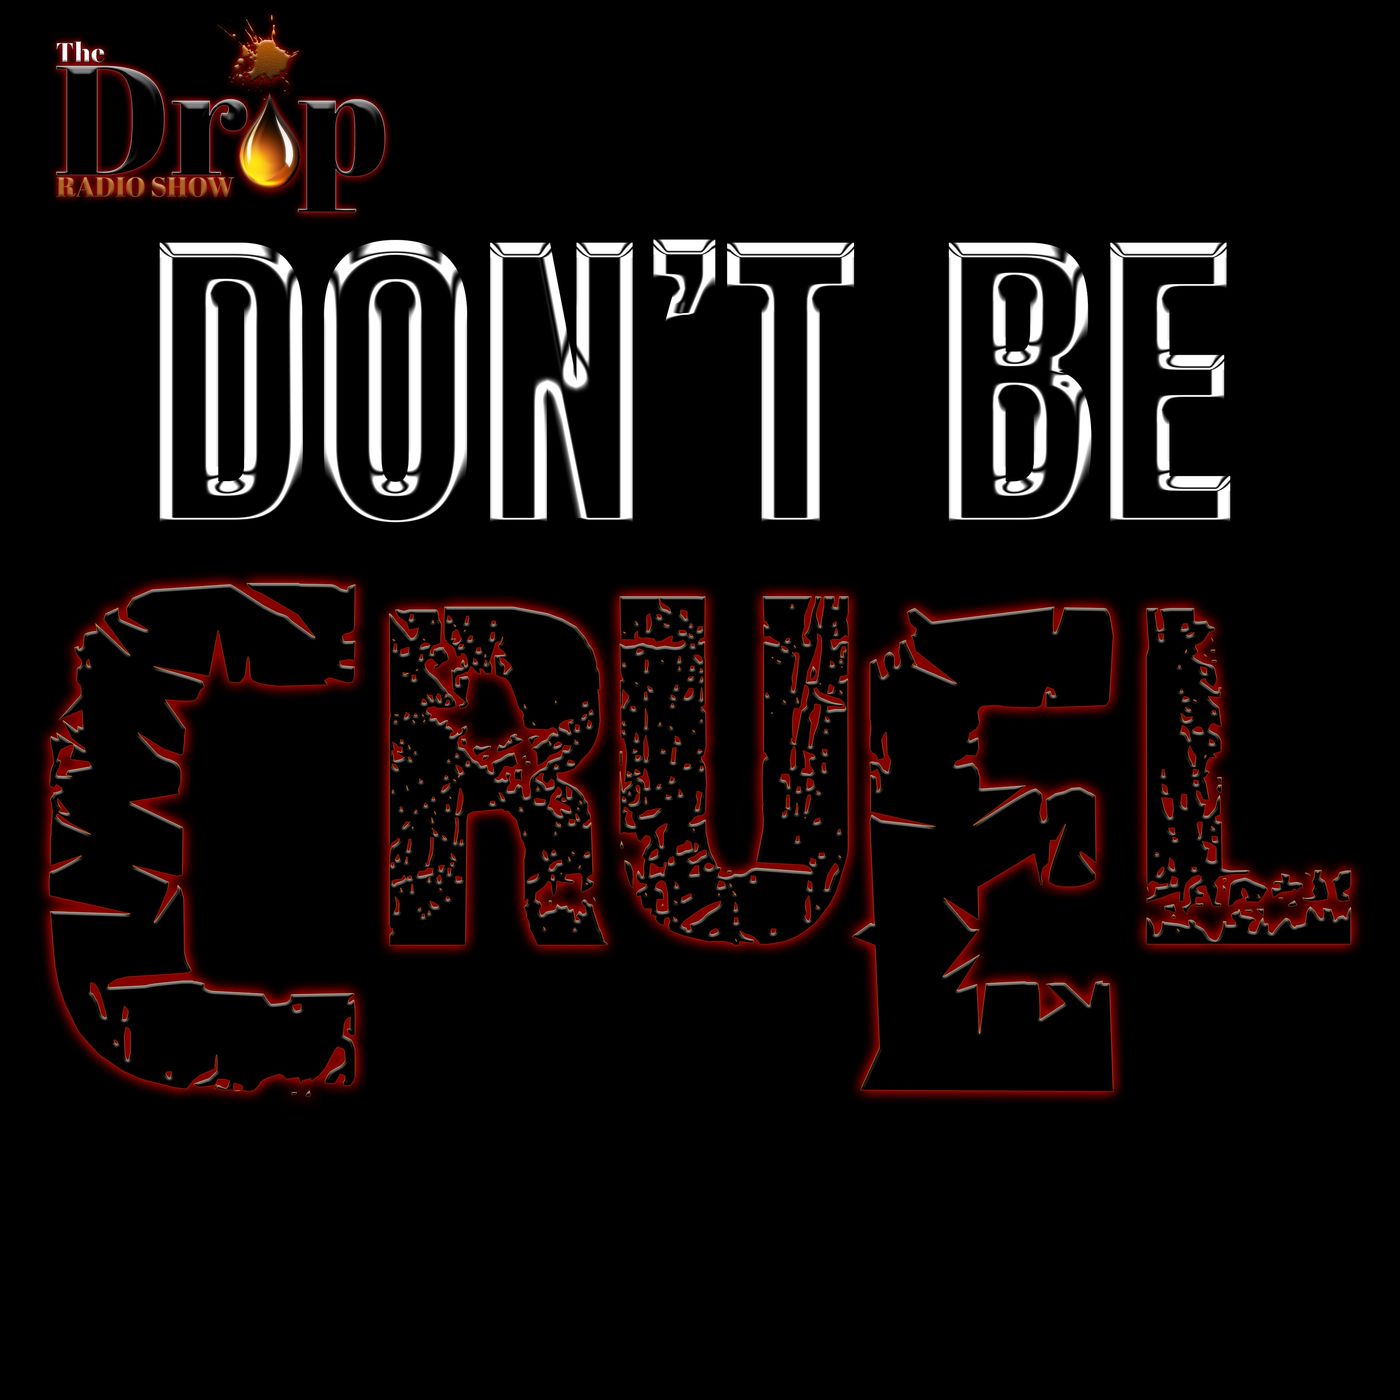 EP 128 - DON’T BE CRUEL